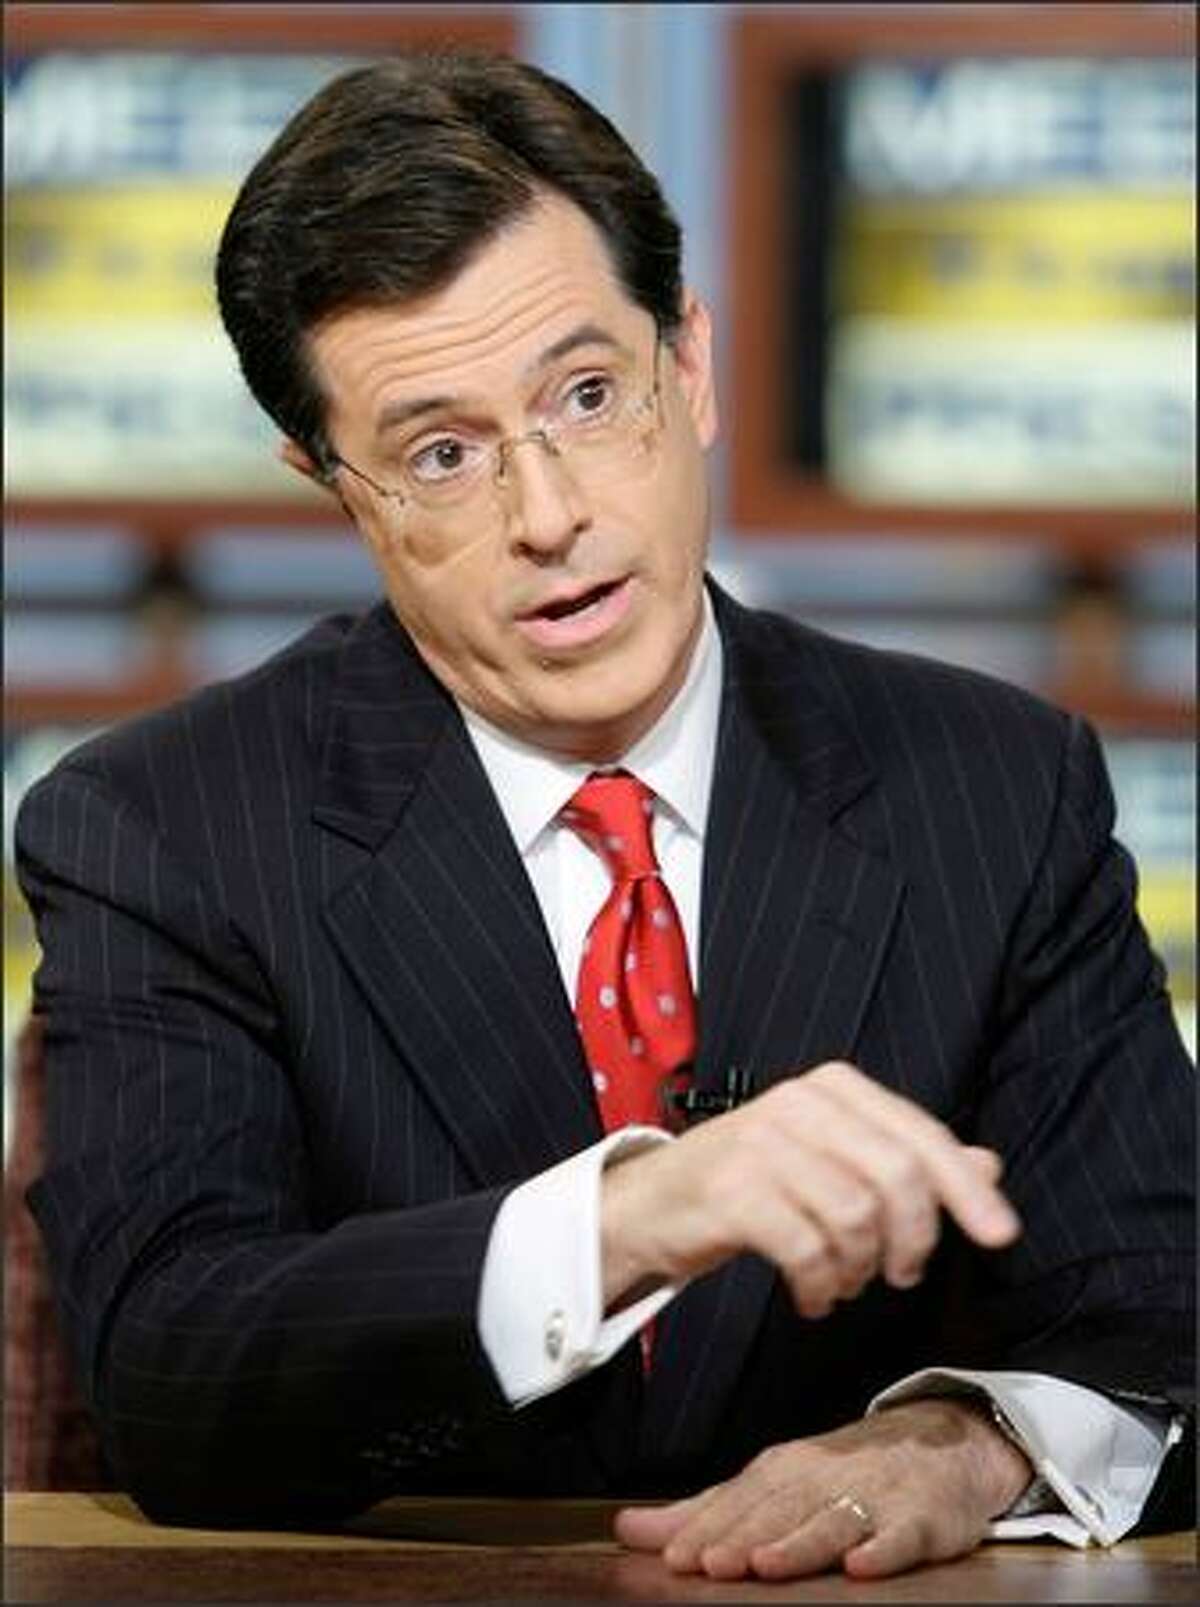 A writers' strike would put pressure on even the quick-witted Stephen Colbert, host of "The Colbert Report."